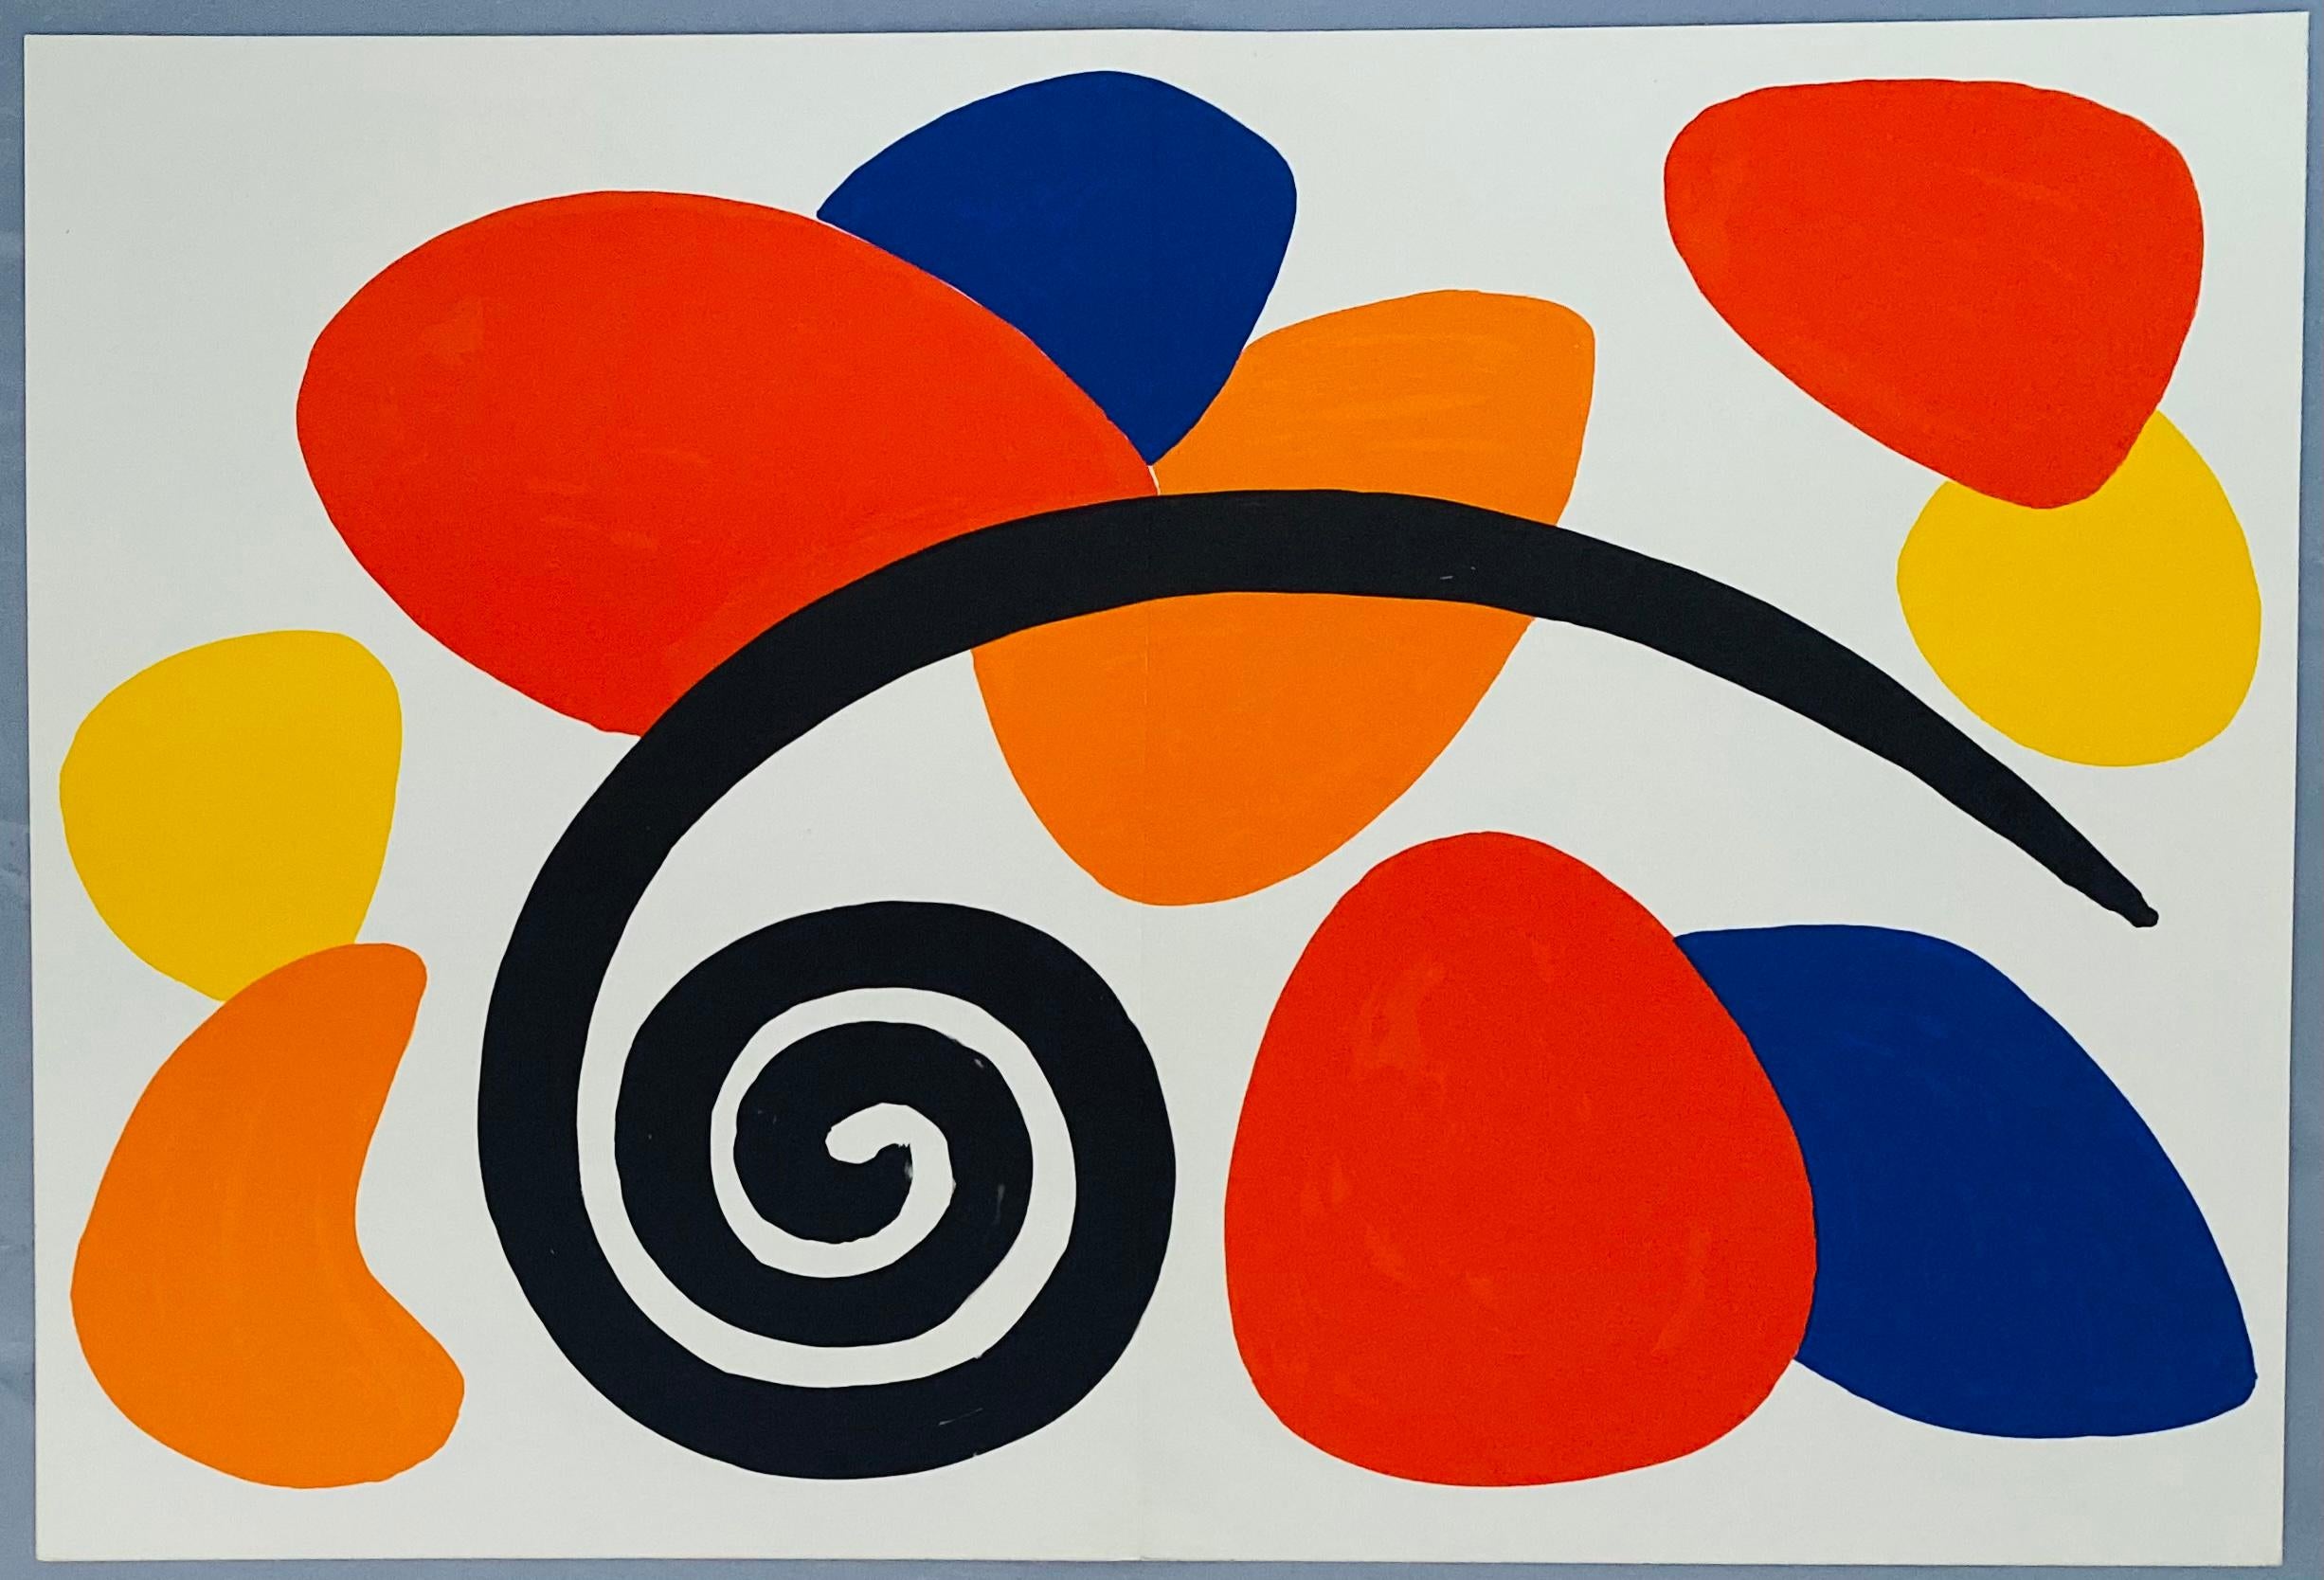 Original 1960s Alexander Calder lithograph:

Dimensions: 15 x 22 inches.

Portfolio: Derriere Le Miroir. Published by: Galerie Maeght, Paris, 1968.

Very good overall vintage condition with bright colors. Contains a center fold-line as originally